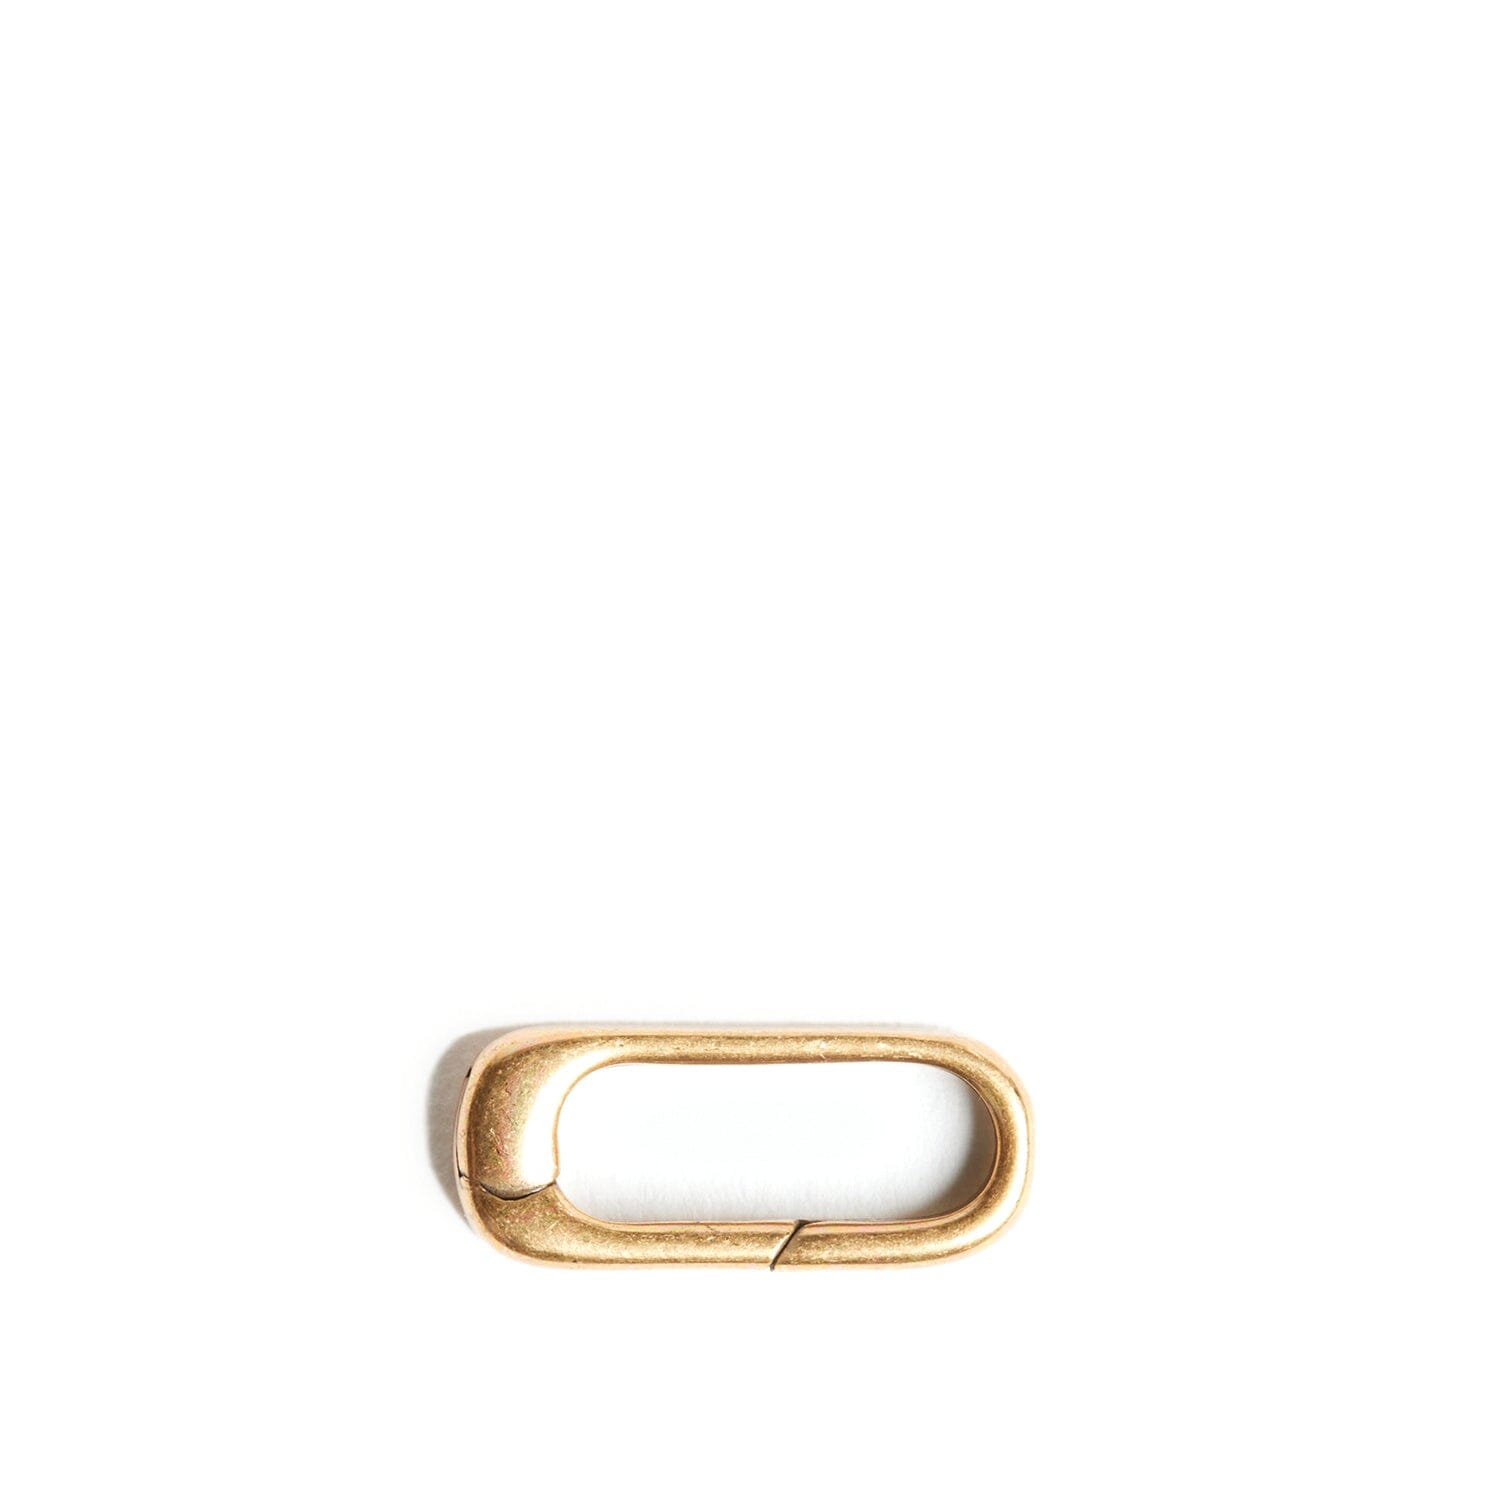 Charm Connector | 14k Gold Plate, Small Charm Fallen Aristocrat 